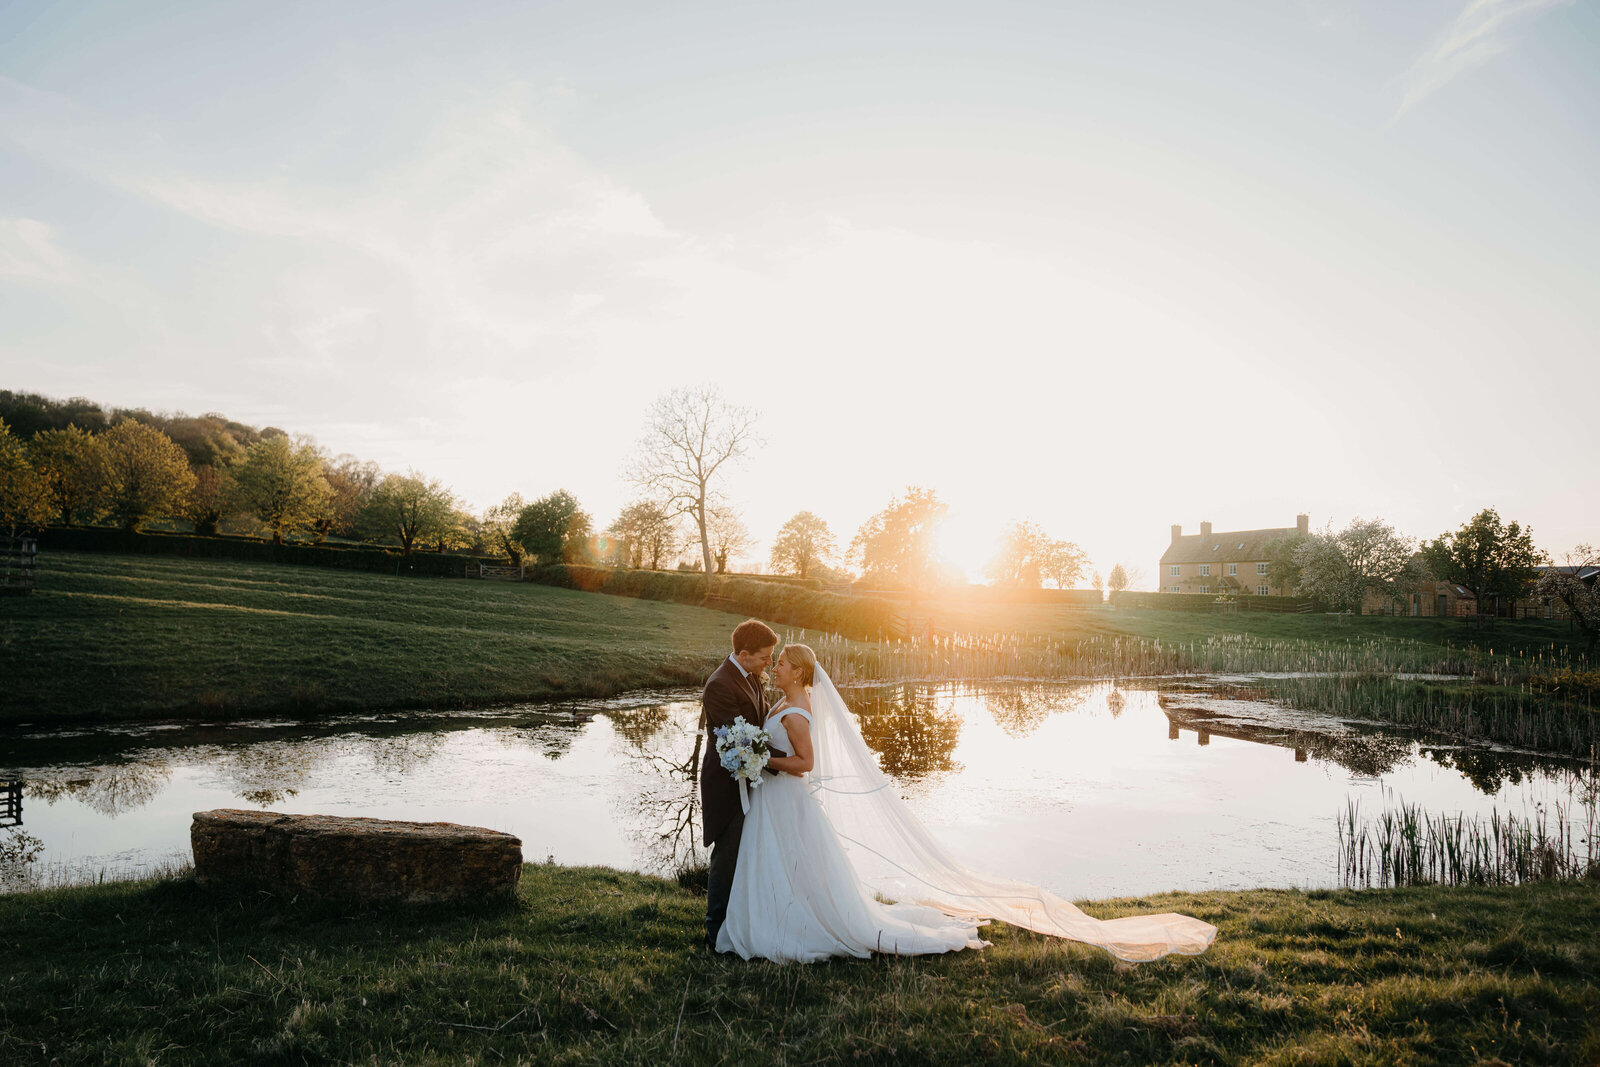 Sunset over the lake at primrose hill farm featuring a portrait of the married couple in suzanne neville dress